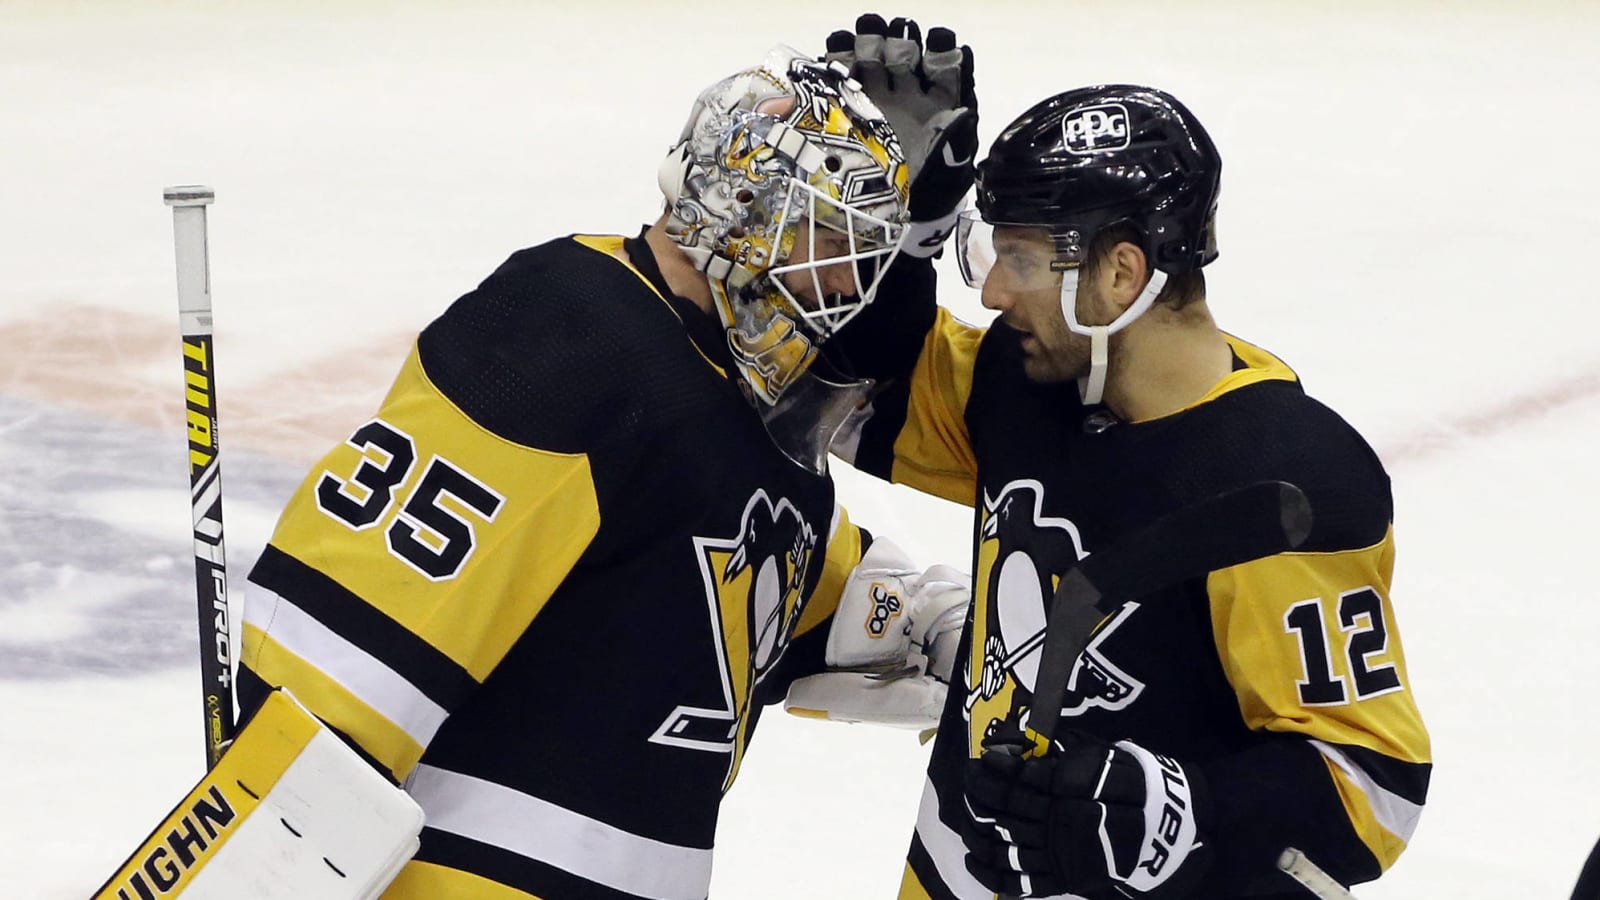 Penguins could look to add to roster ahead of playoff hunt